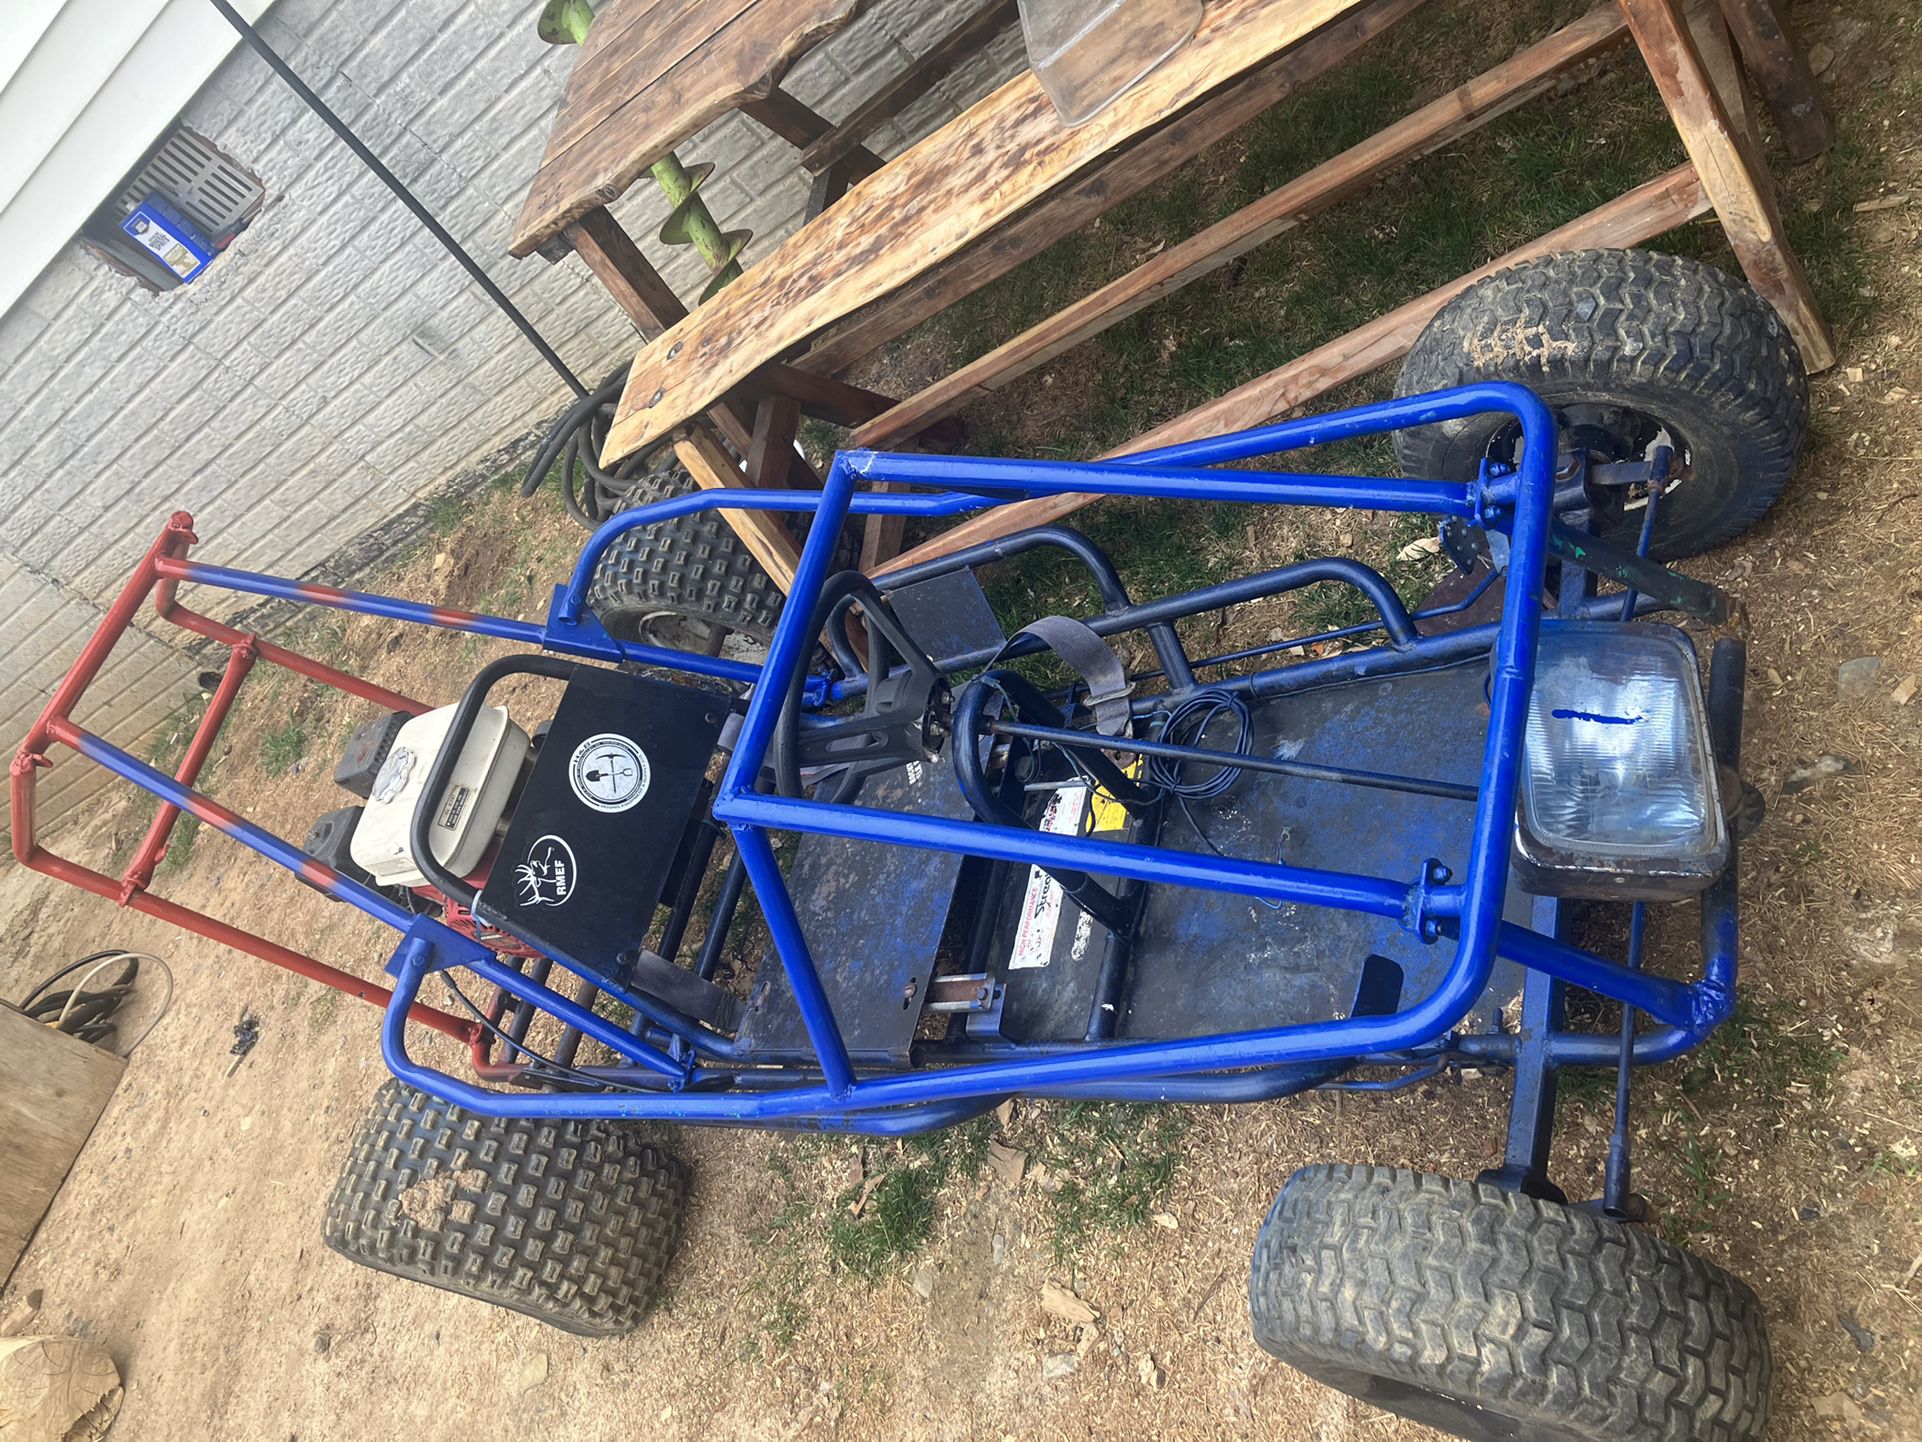 I am selling this go-kart it needs a bit of work.